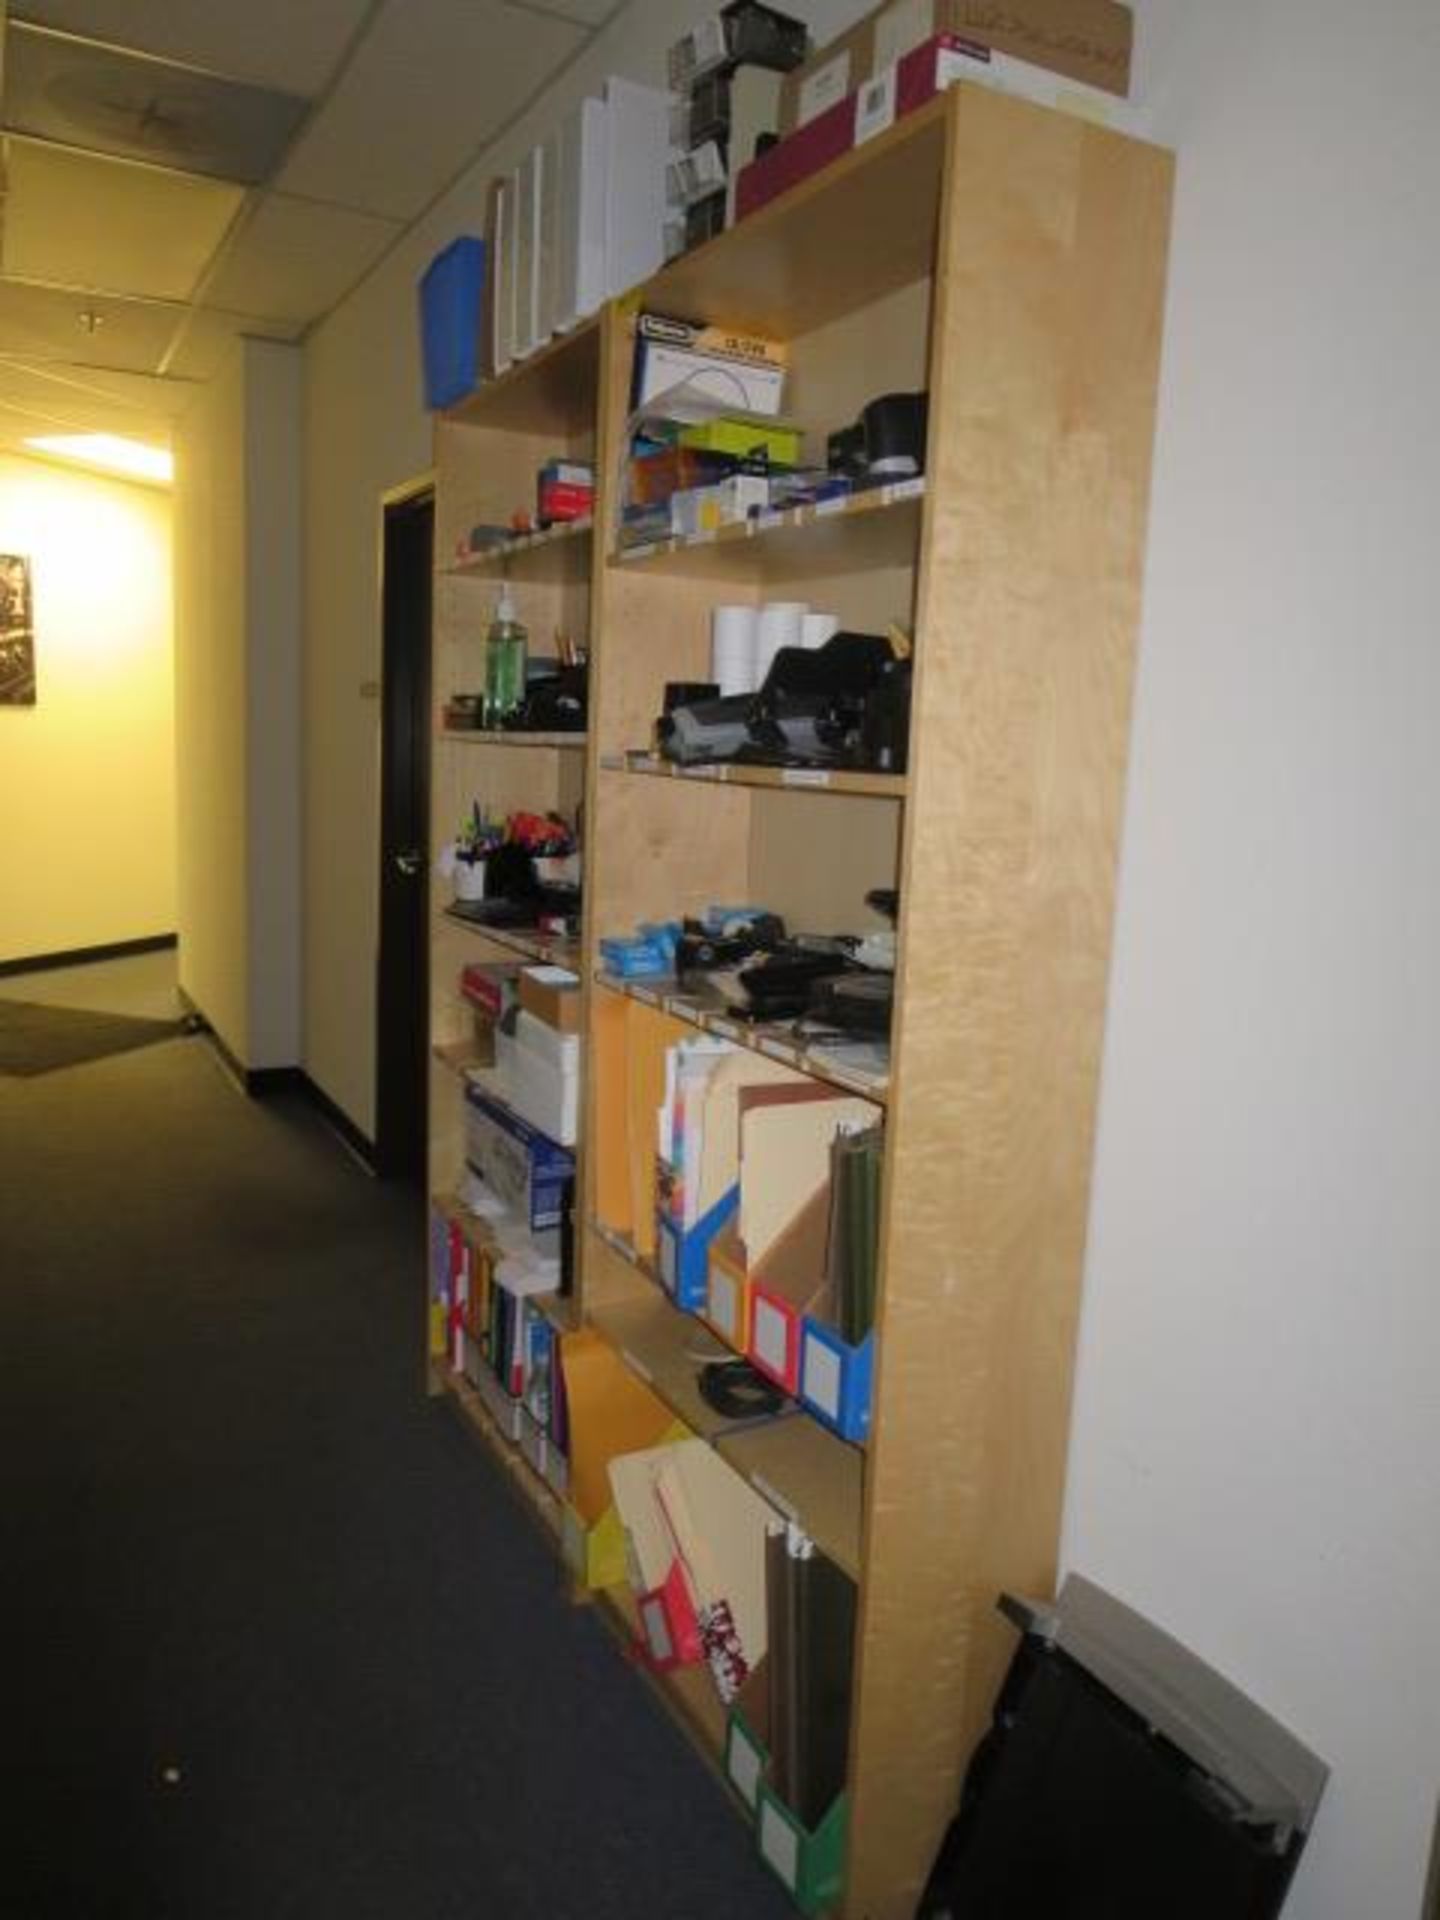 Wood Book Shelves, Includes Office Supply Contents - Image 2 of 2